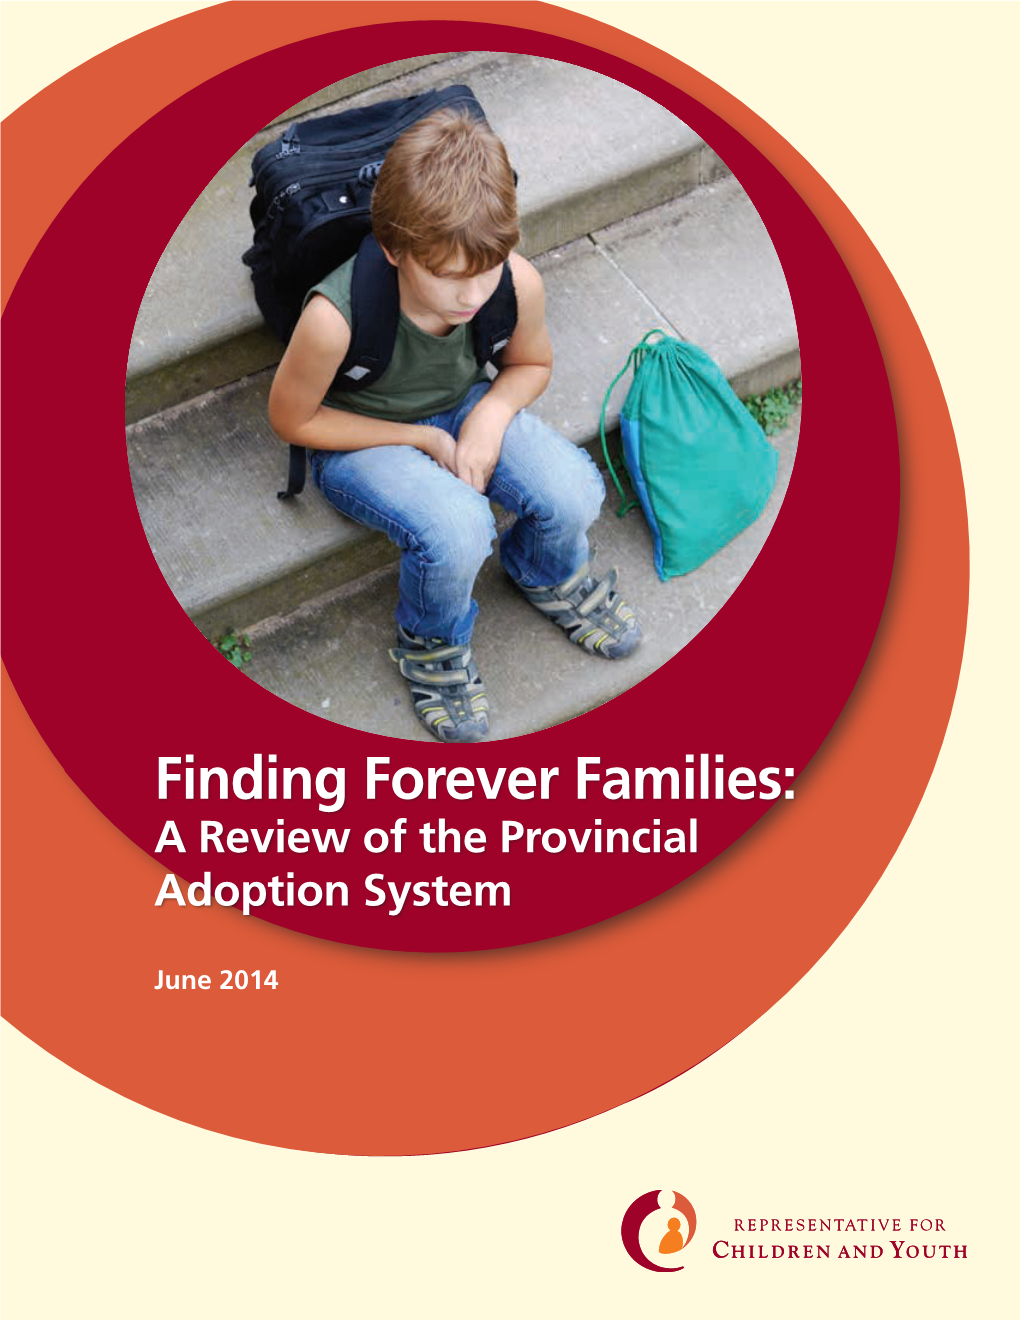 Finding Forever Families: a Review of the Provincial Adoption System